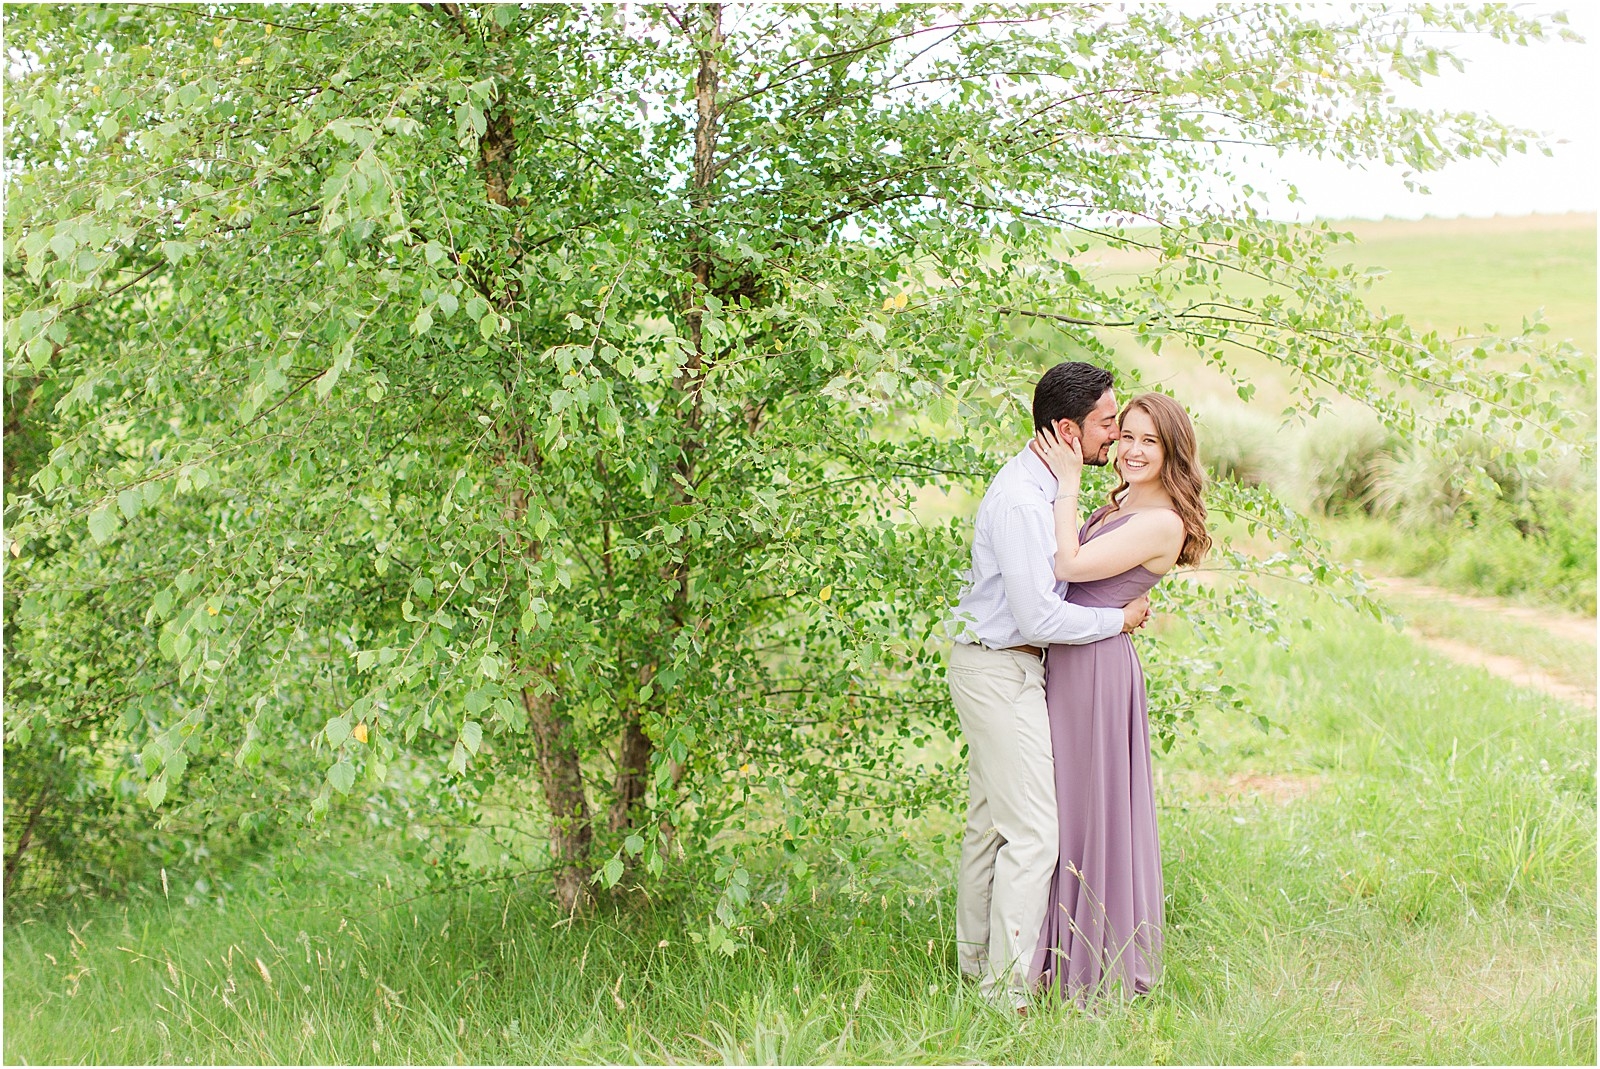 A Stone Tower Winery Leesburgh Engagement Session | Caitlin and Jason 012.jpg